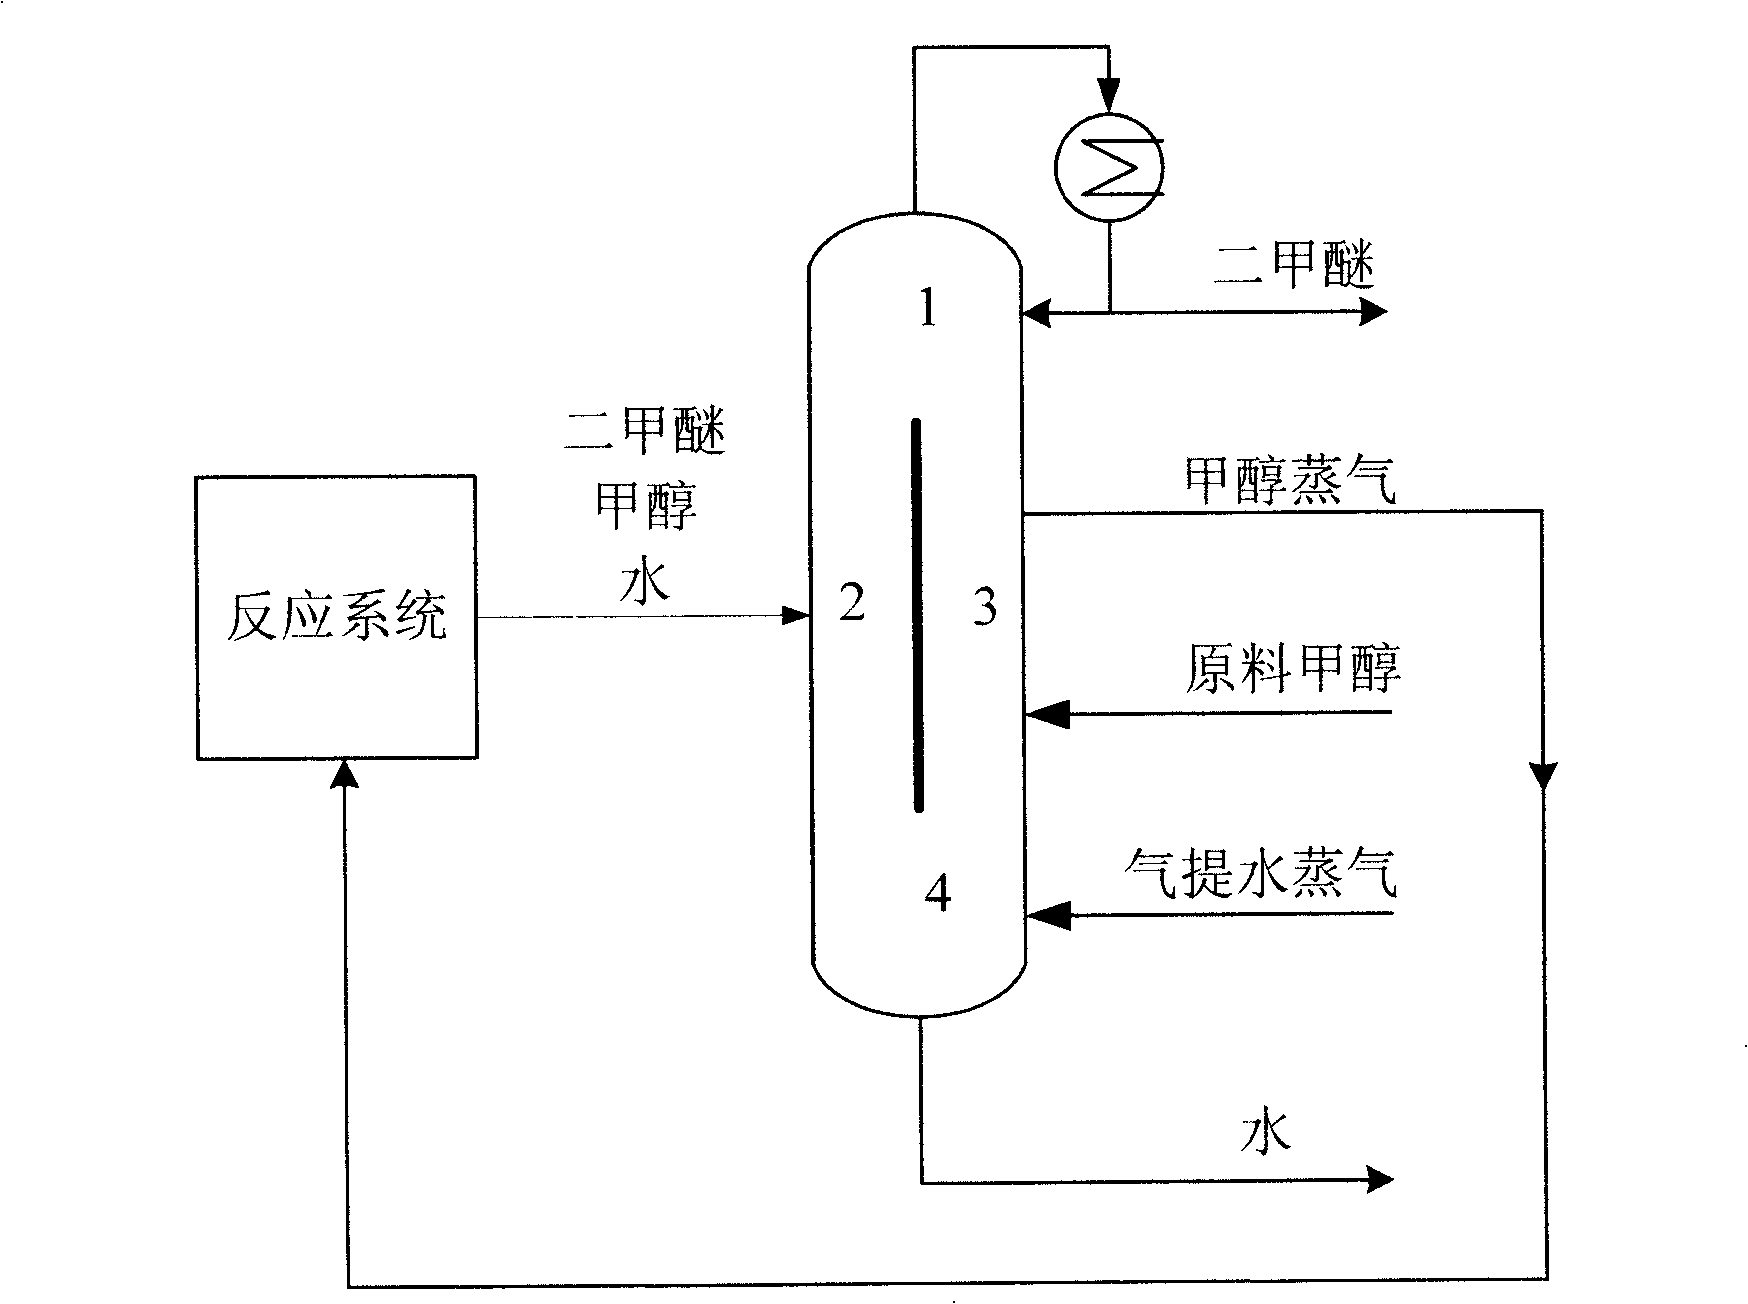 Energy-saving dimethyl ether production flow and apparatus thereof